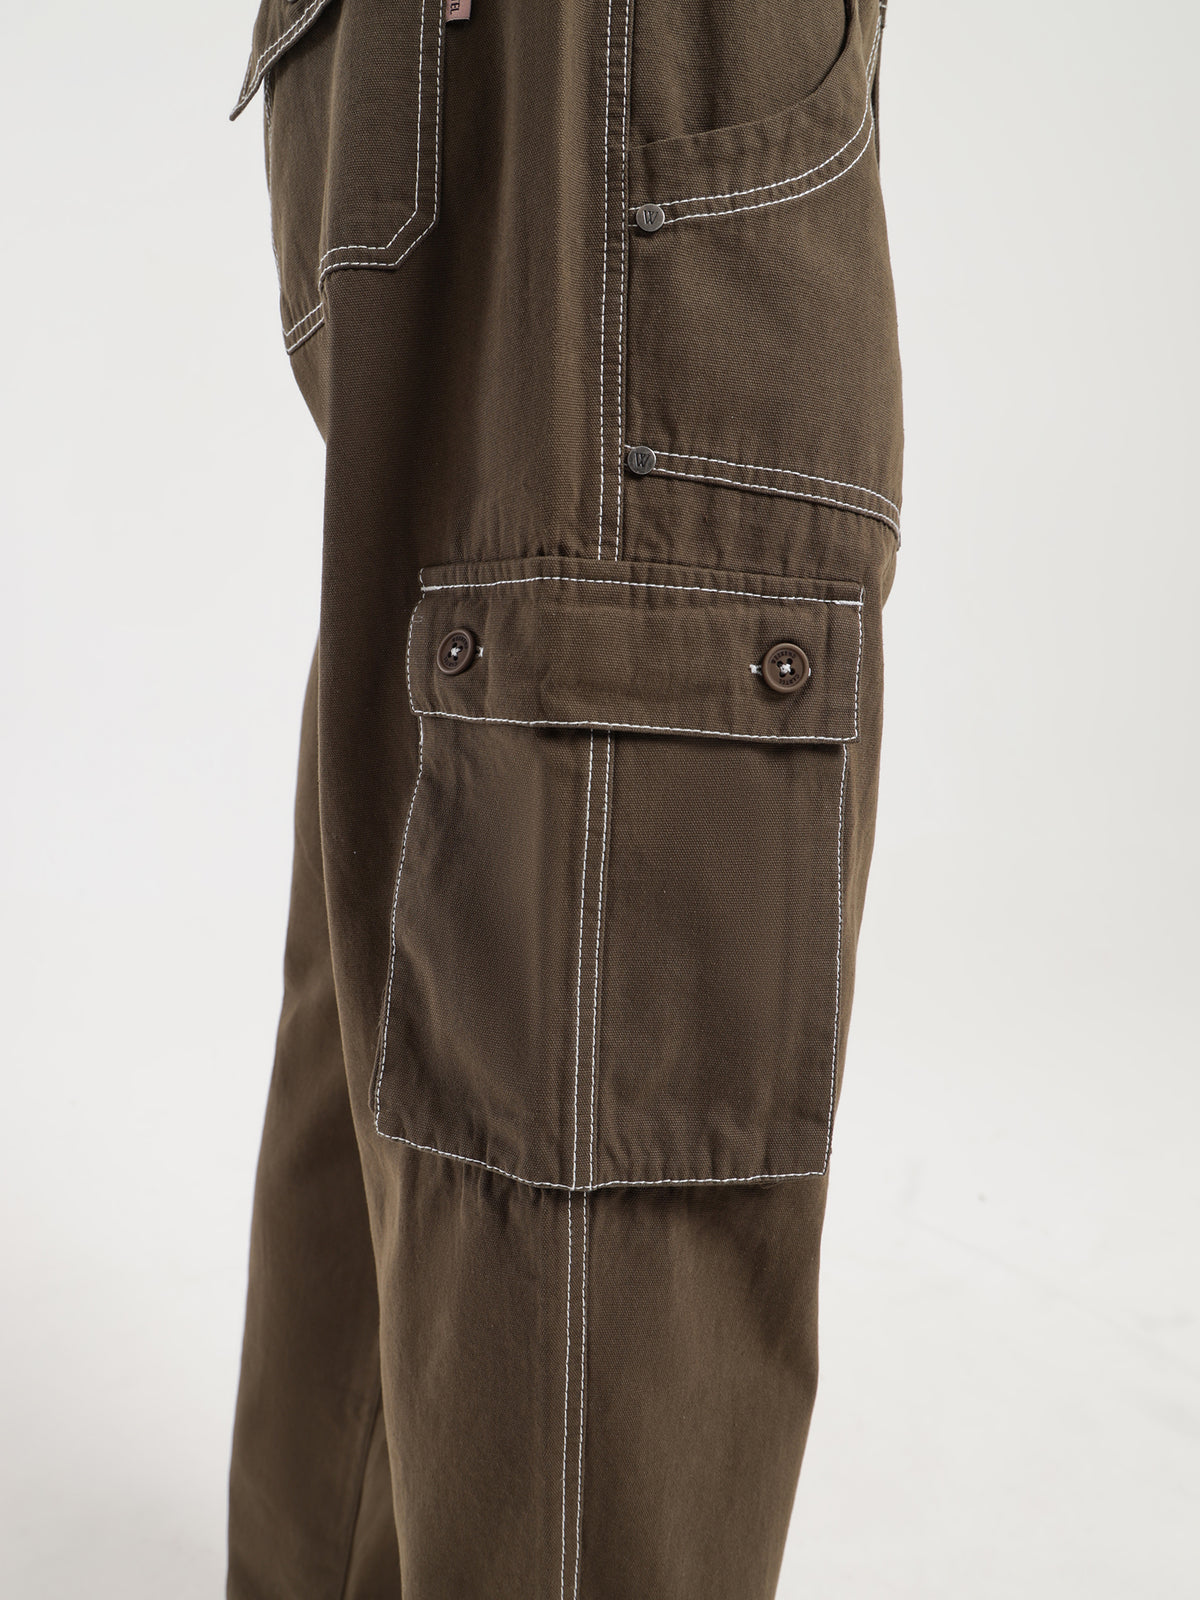 Syndicate Cargo Pants in Chocolate